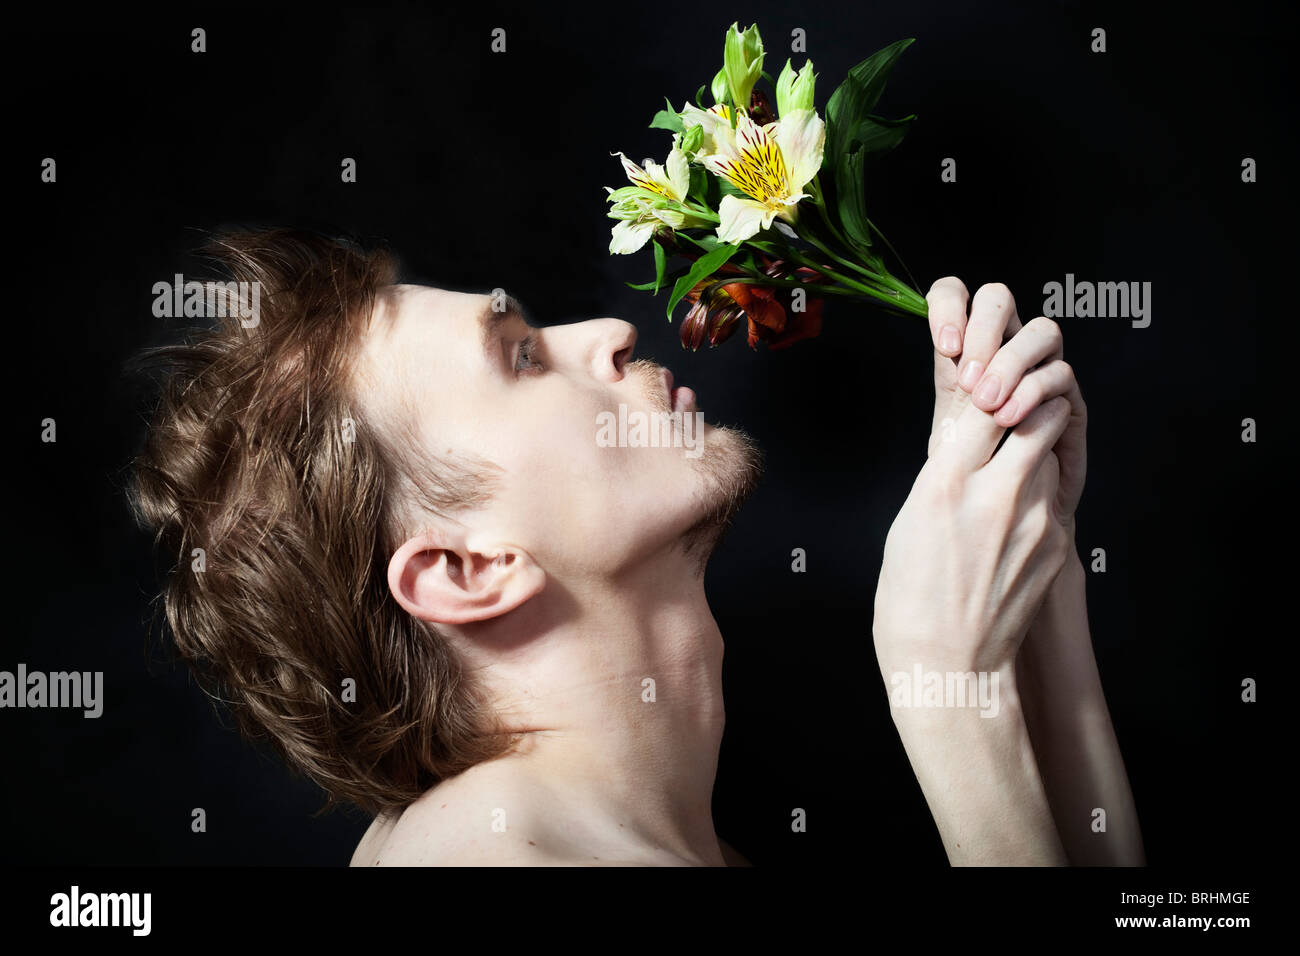 face of the young men sniffing bouquet of flowers on a black background Stock Photo